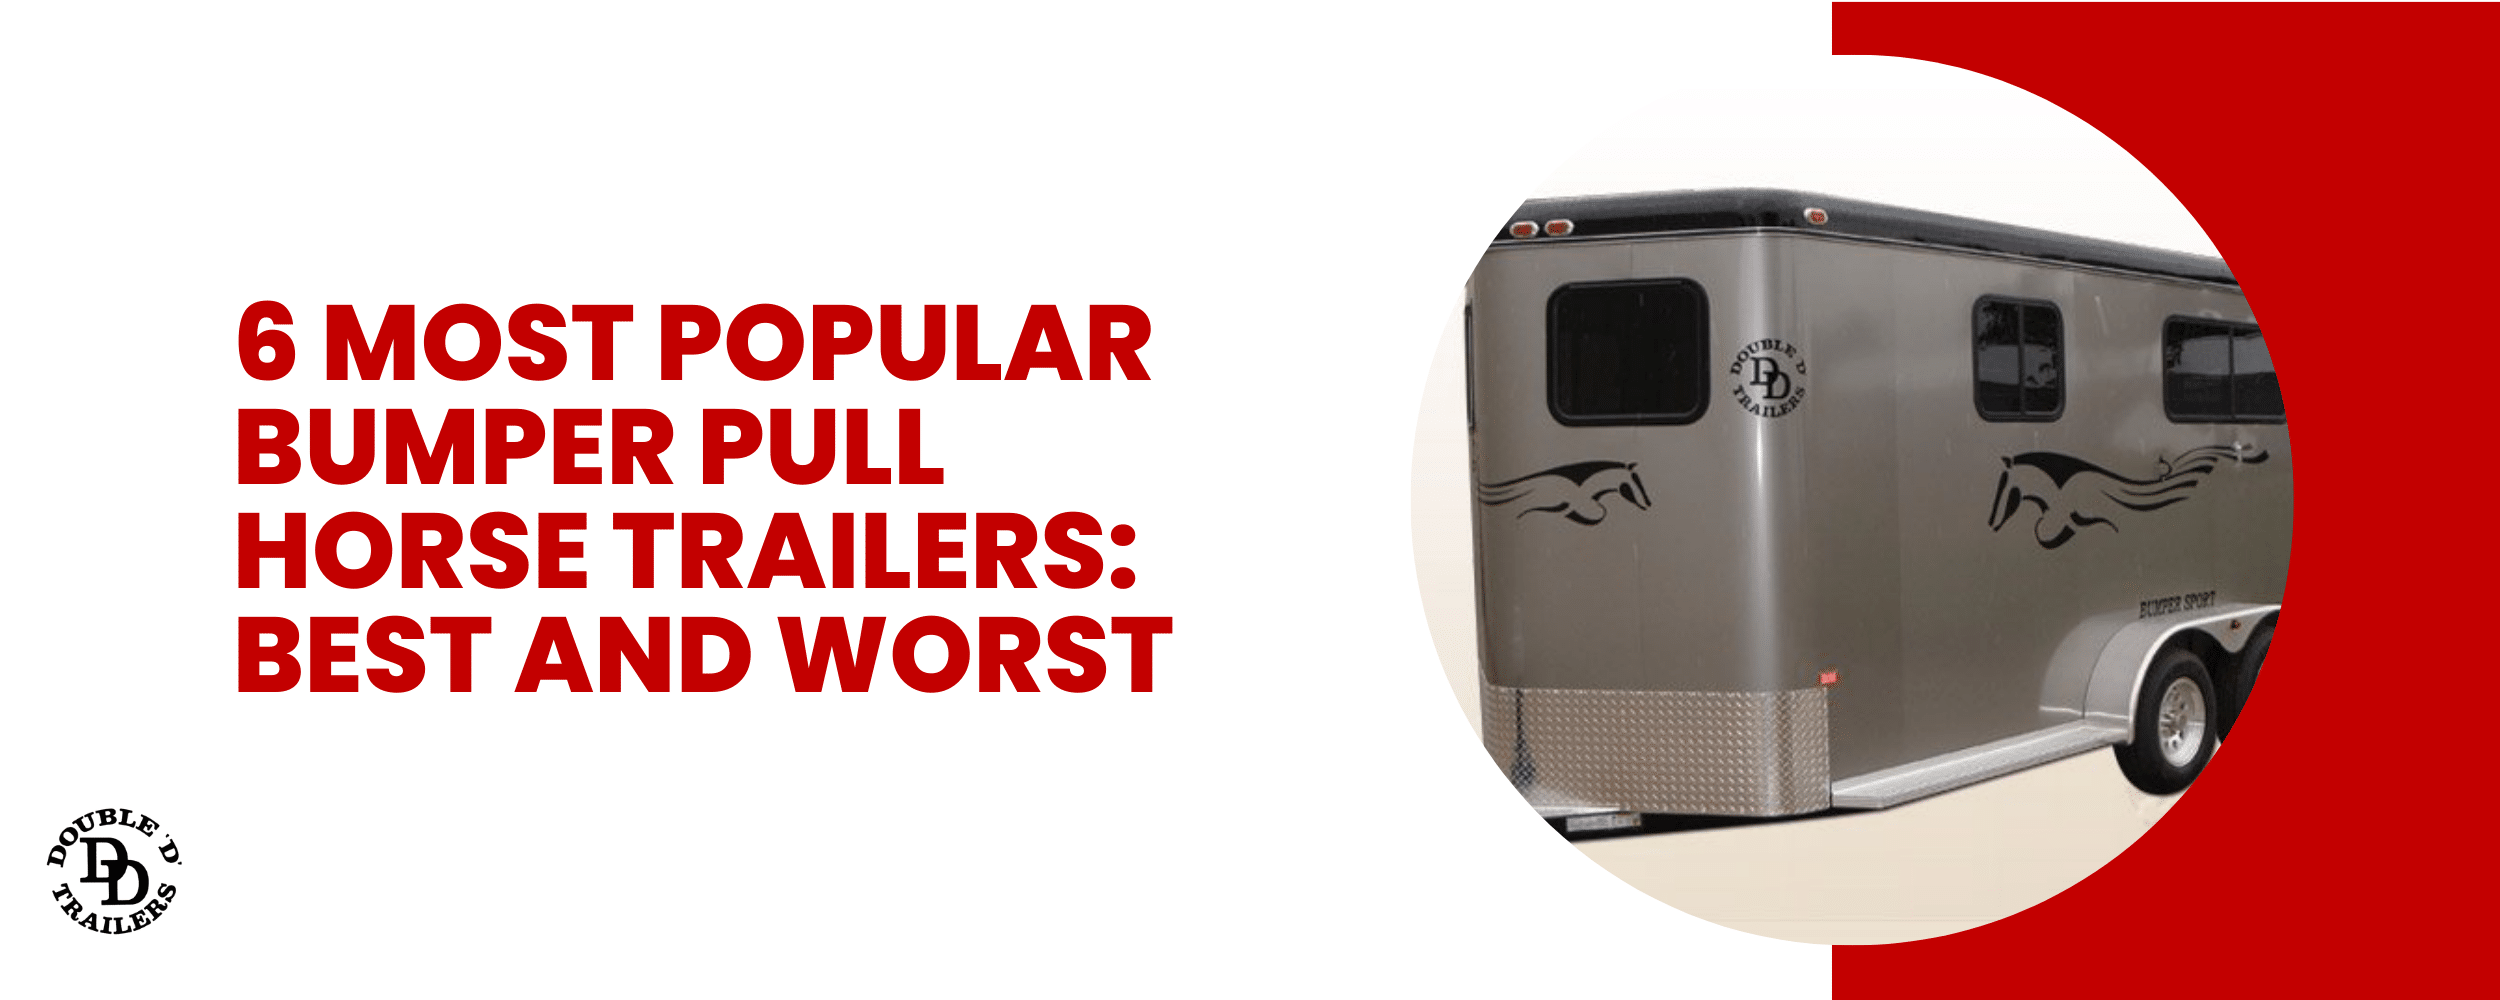 6 Most Popular Bumper Pull Horse Trailers: Best and Worst Guide by Double D Trailers